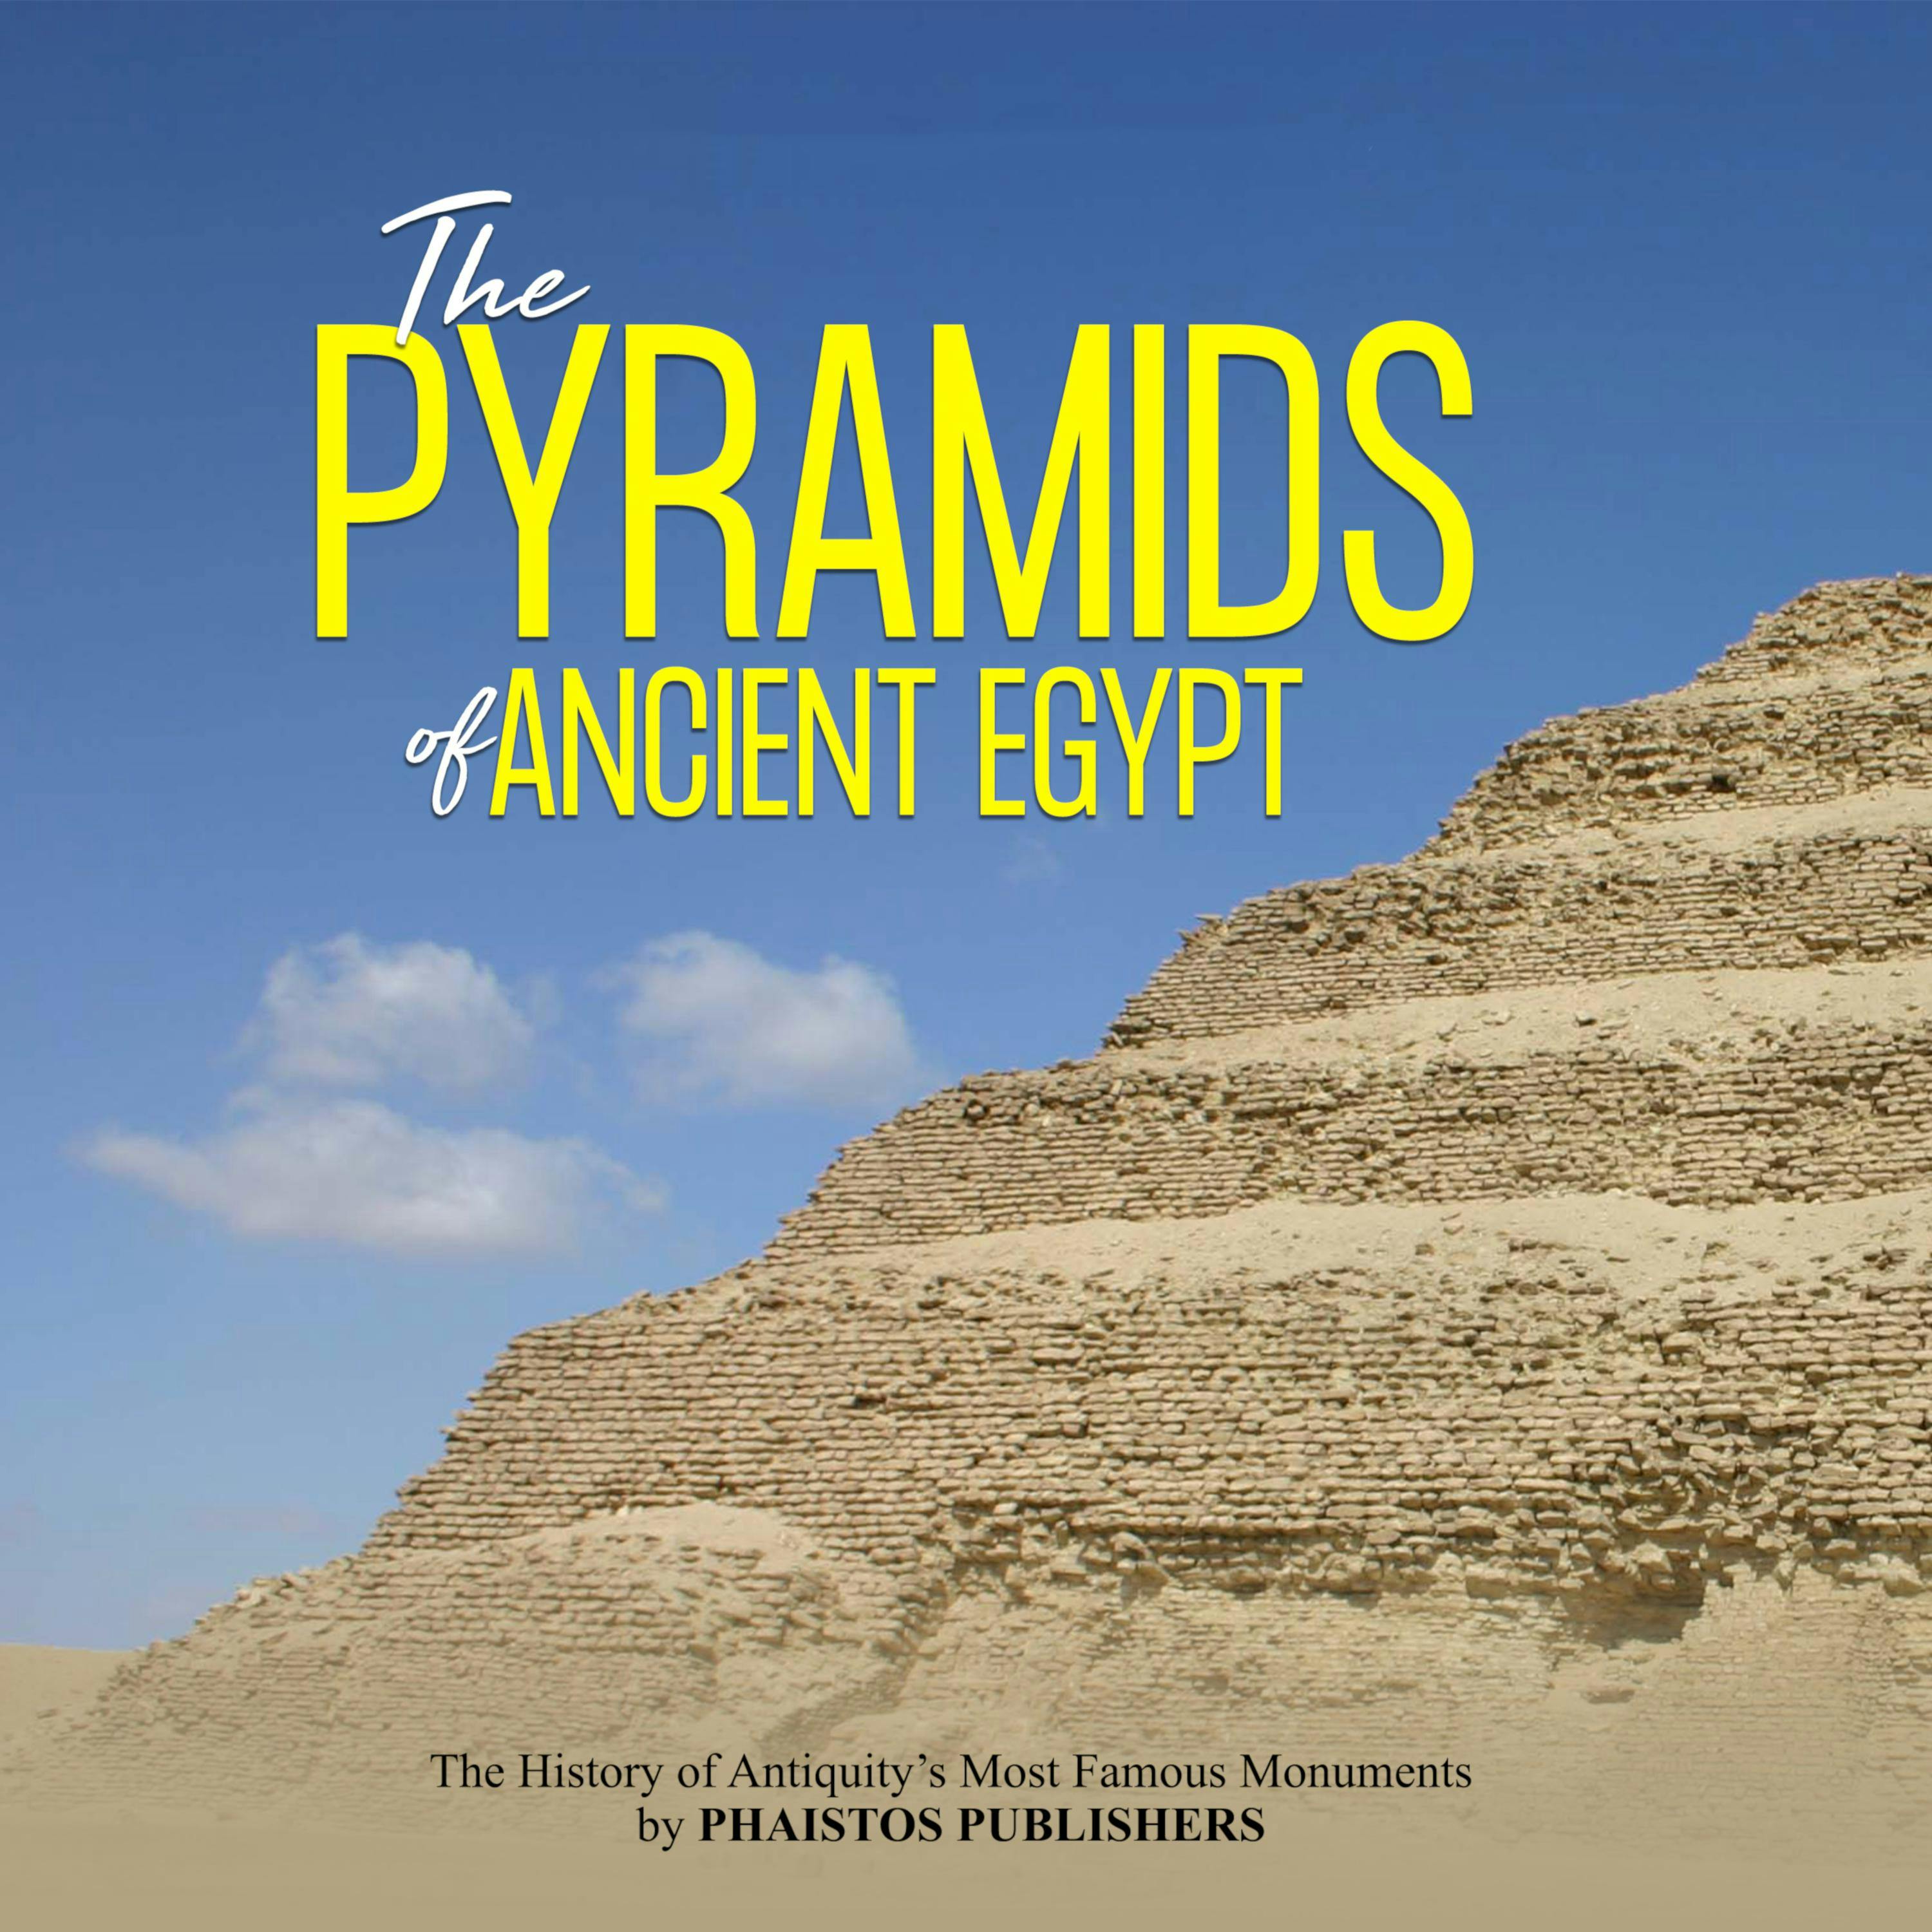 The Pyramids of Ancient Egypt: The History of Antiquity’s Most Famous Monuments - Phaistos Publishers